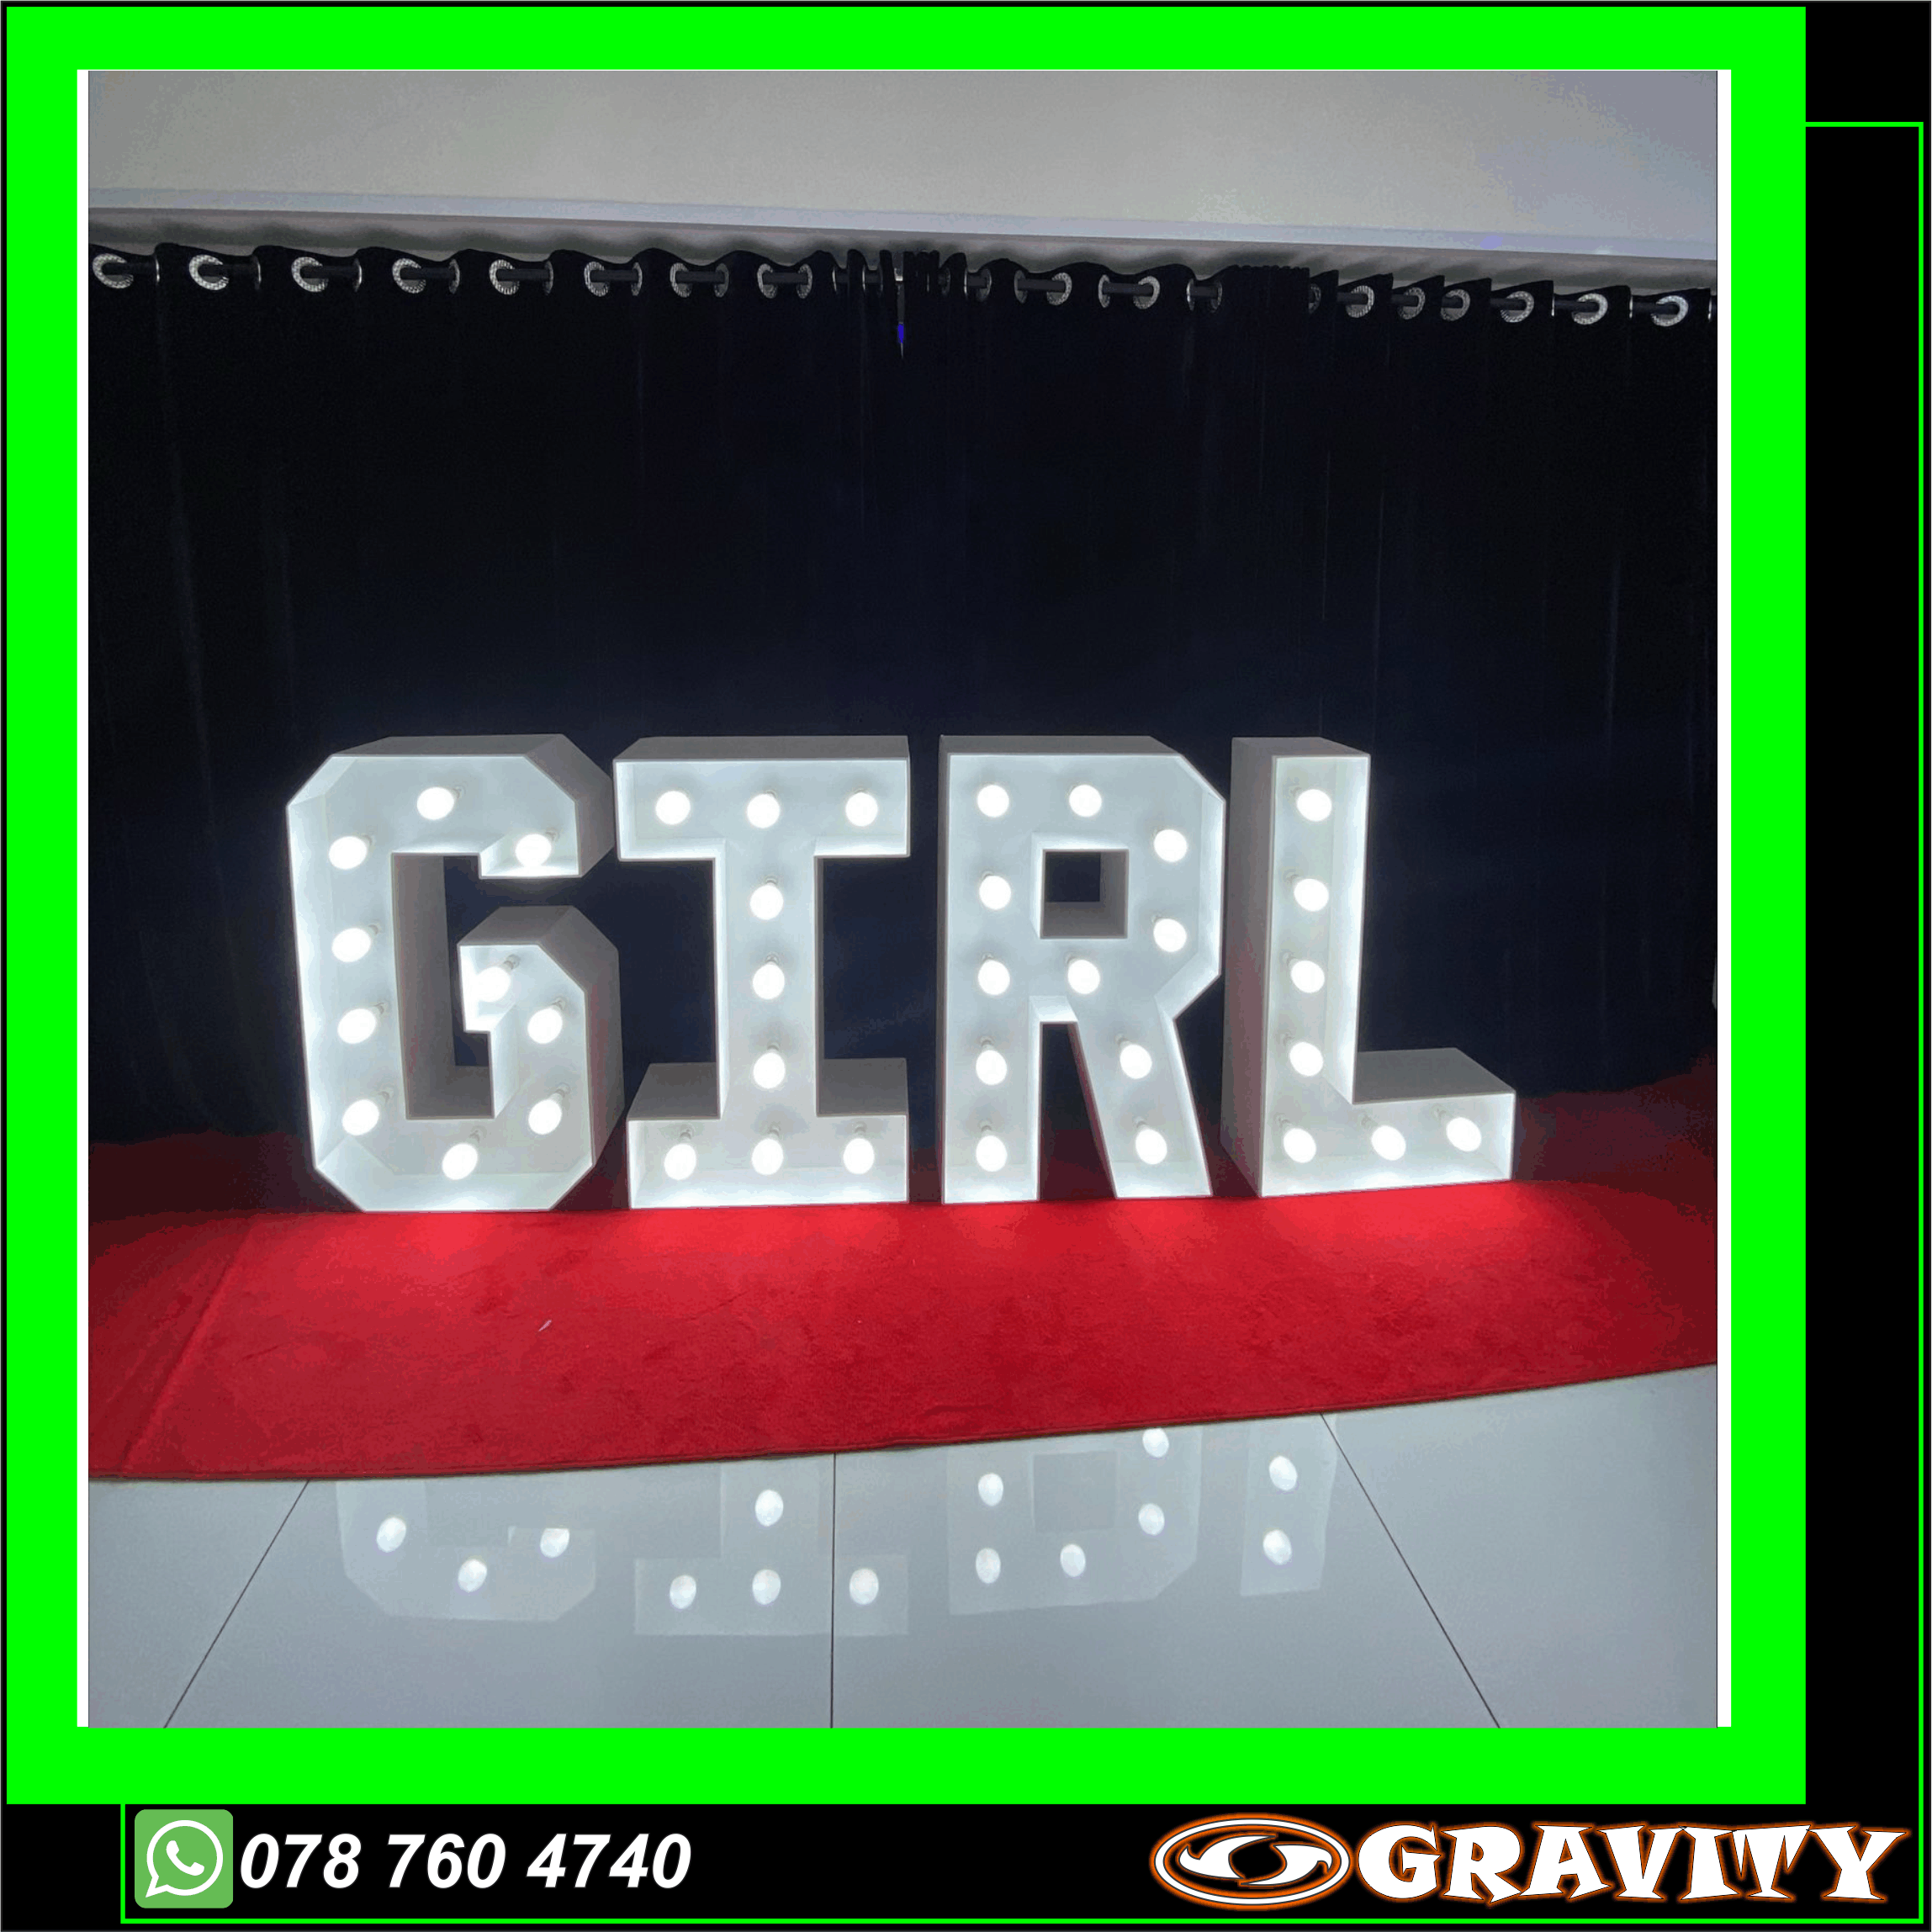 DURBAN LIGHT UP MARQUEE LETTERS FOR DIY HIRE  We offer a wide range of Marquee Letters and Numbers in Durban for absolutely any event including Weddings, Birthdays, Corporate Events & Functions in KZN.  The marquee numbers or Letters can be setup outdoors, on the grass and indoors  These marquee's are 1 meter high and consist of high quality 12w Cool White LED Bulbs installed   Size - 1000mm x 600mm x 200mm                100cm  x 60cm  x 20m  Colour - White  All Power Cables inlcuded   Whatsapp us for more info : 078 760 4740 or HOTLINE CONTACT NO.: 031507 2463 031507 2736